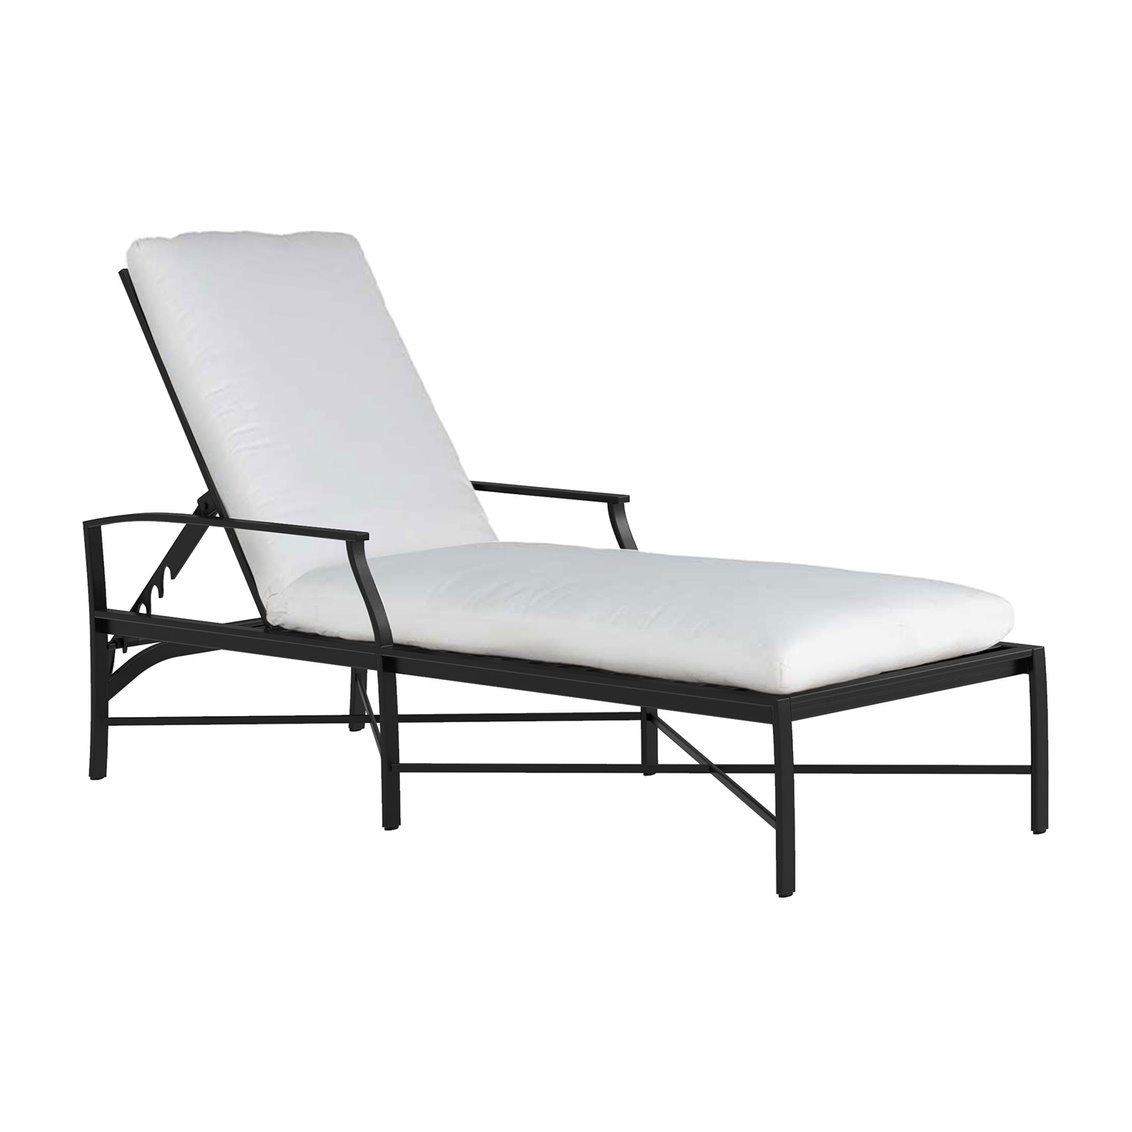 monaco aluminum chaise lounge in slate grey – frame only product image